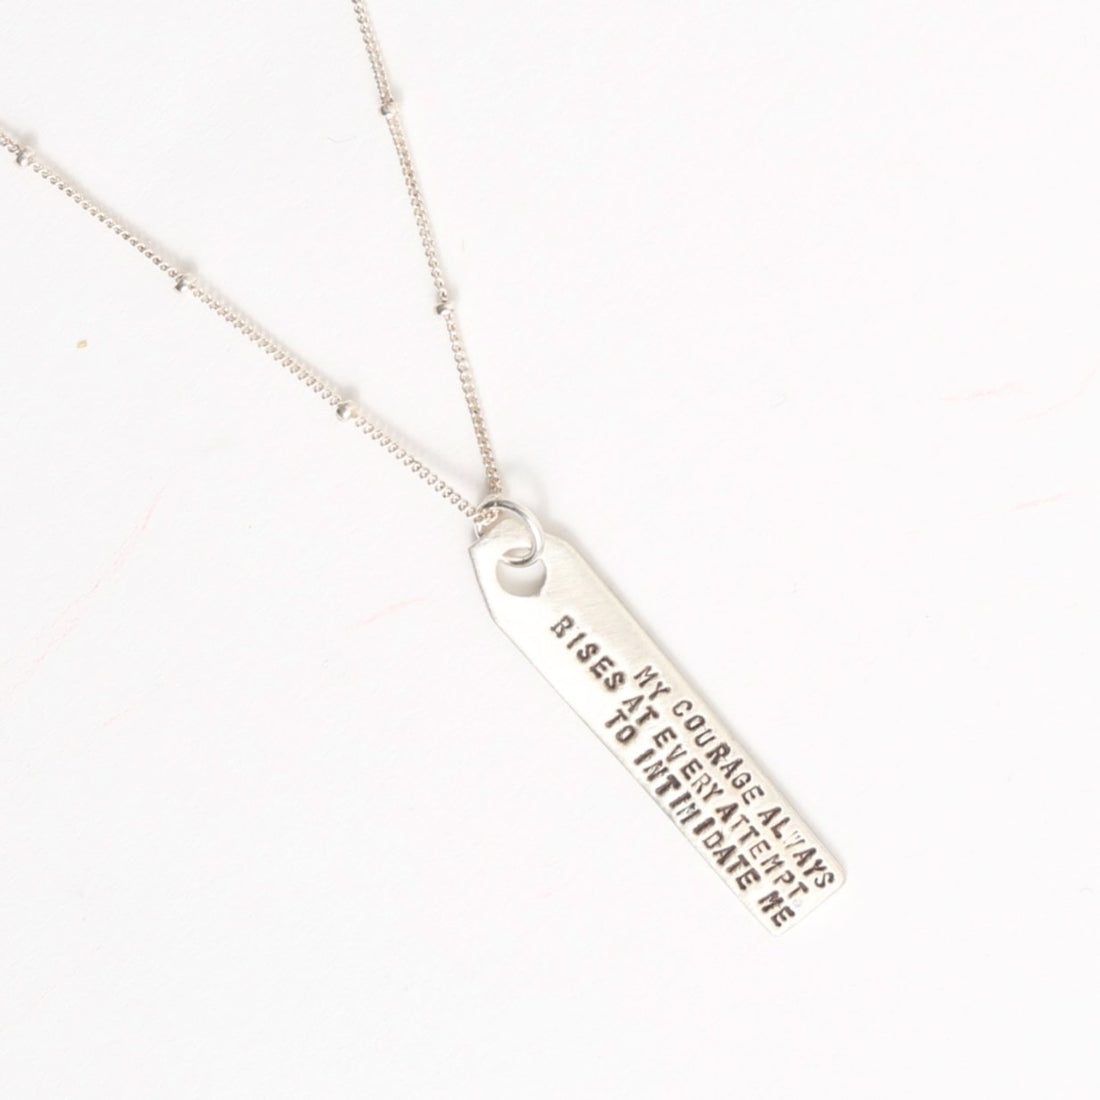 "Jane Austen" Luggage Tag Quote Necklace - Chocolate and Steel